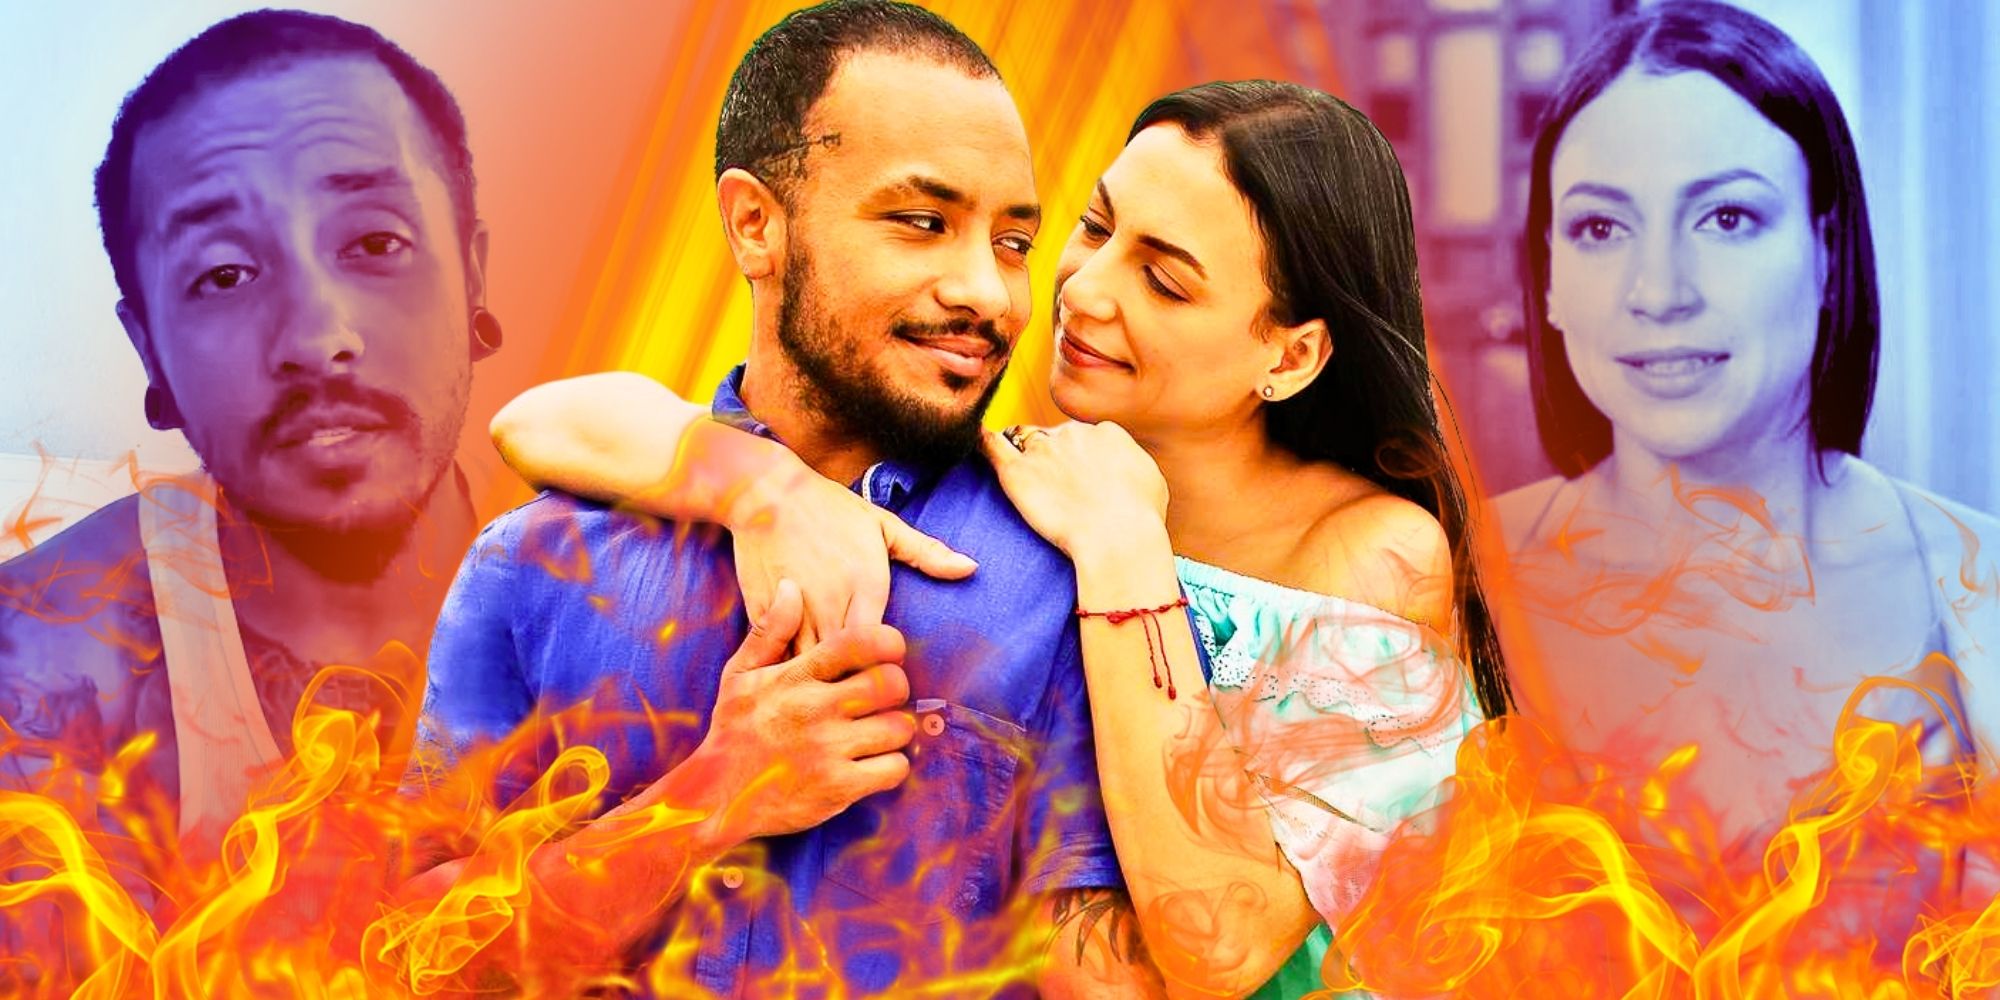 Gabriel Paboga And Isabel Posada from 90 day fiance monatge with fire